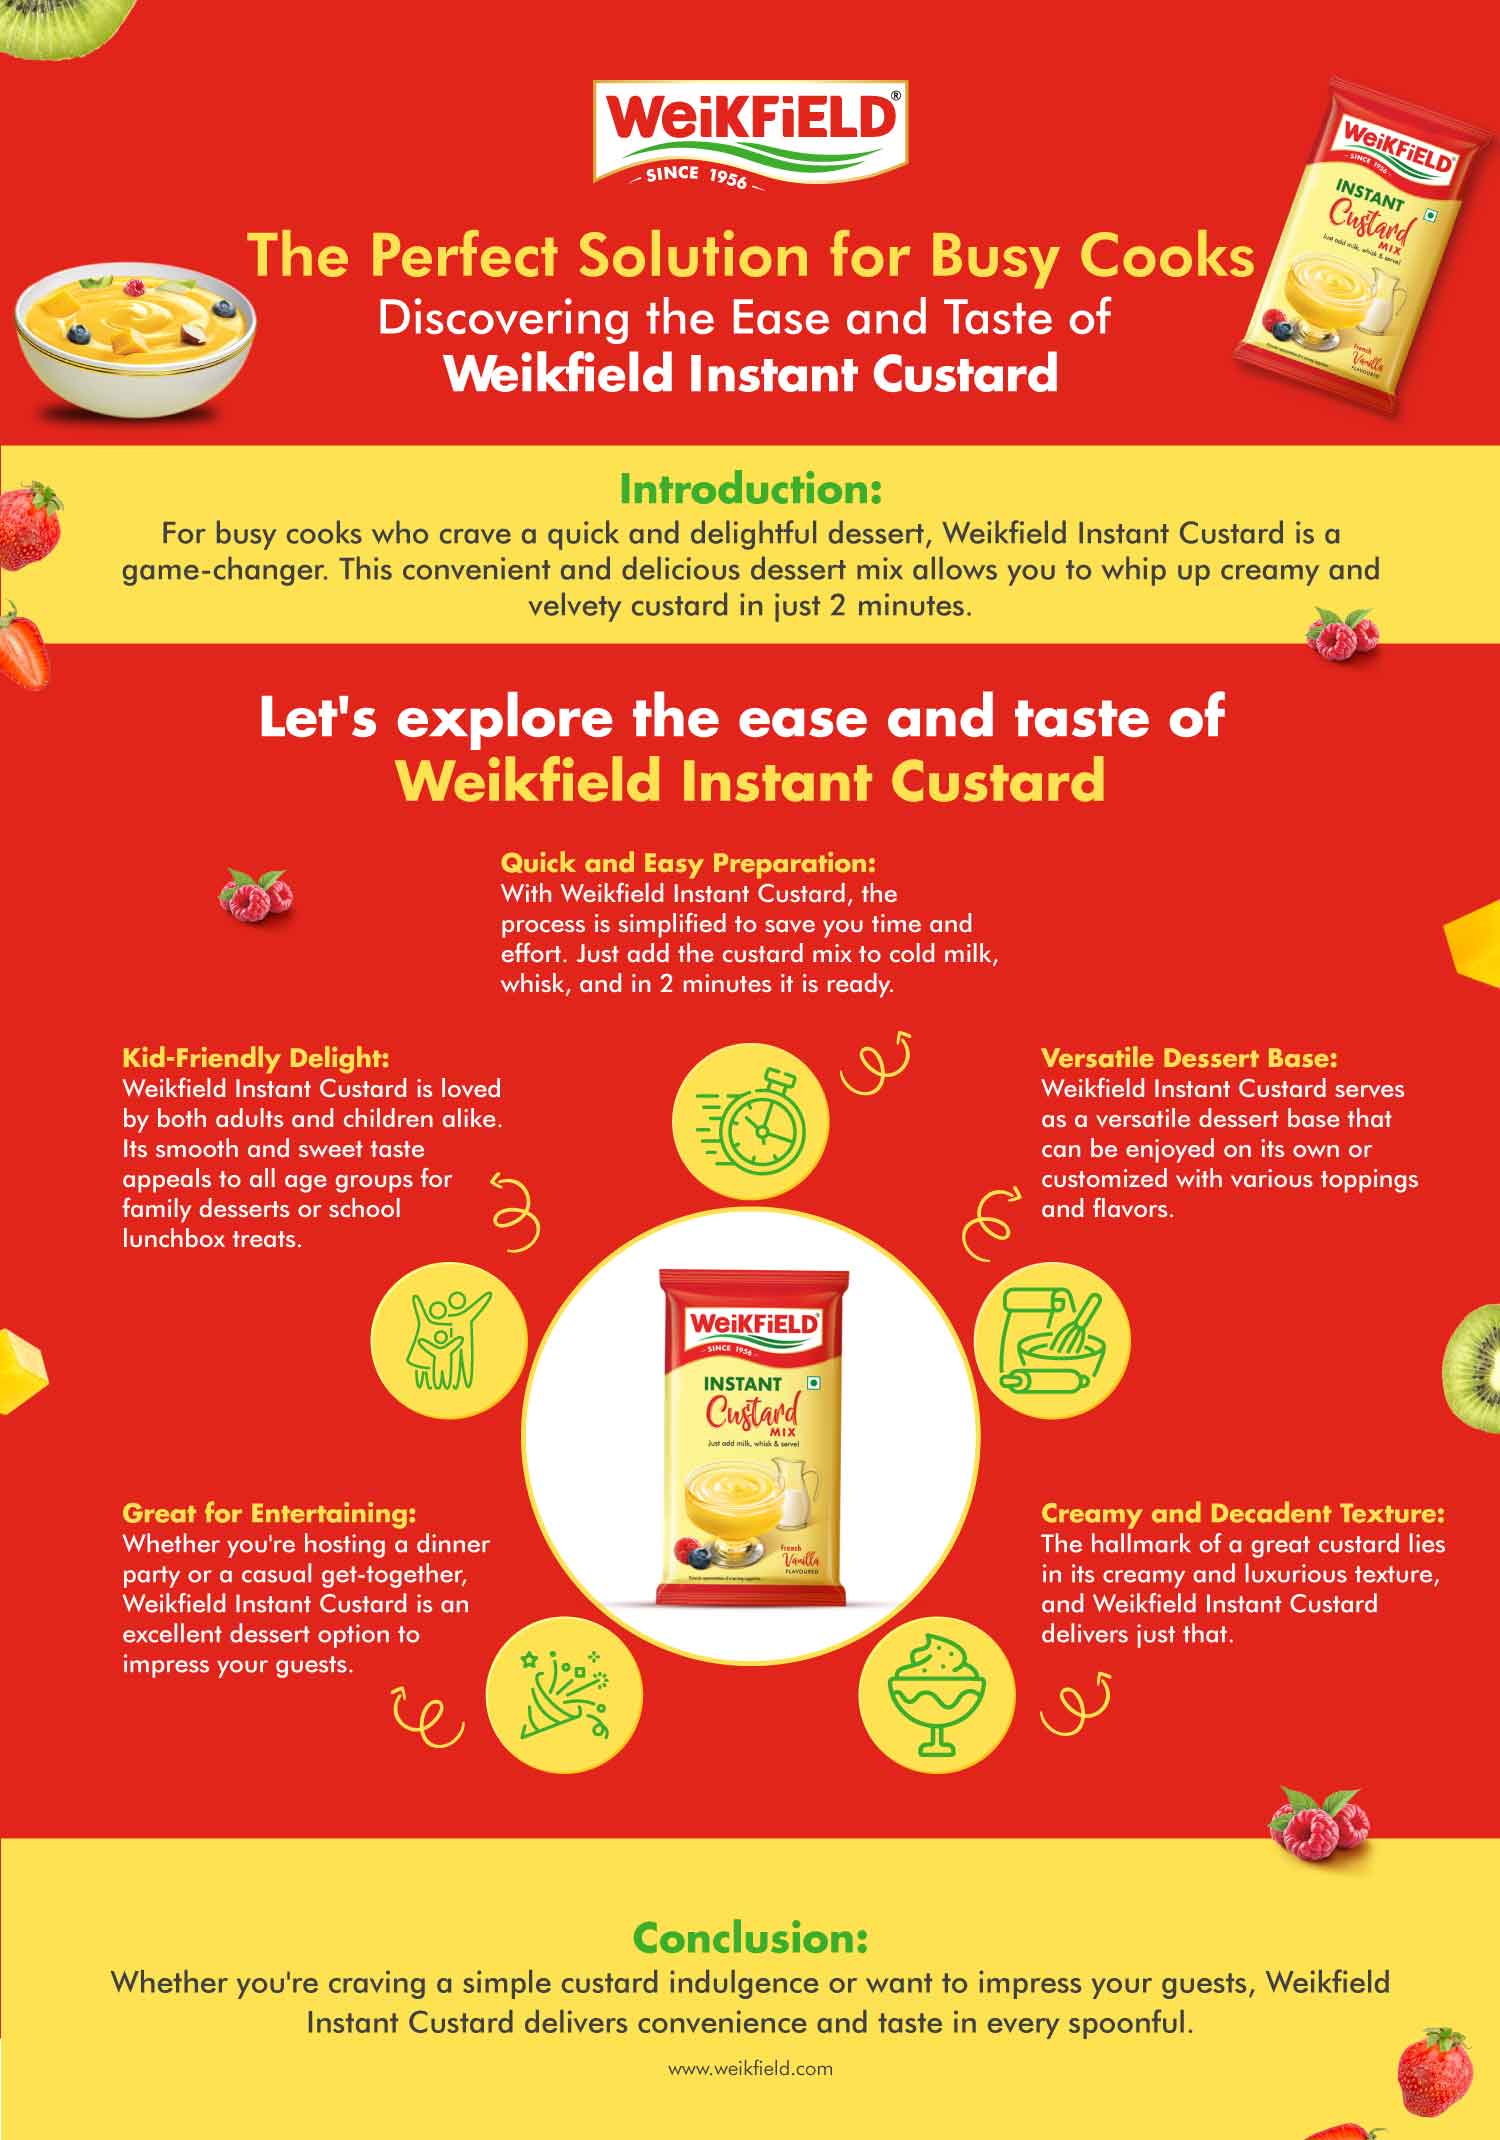 The Perfect Solution for Busy Cooks Discovering the Ease and Taste of Weikfield Instant Custard